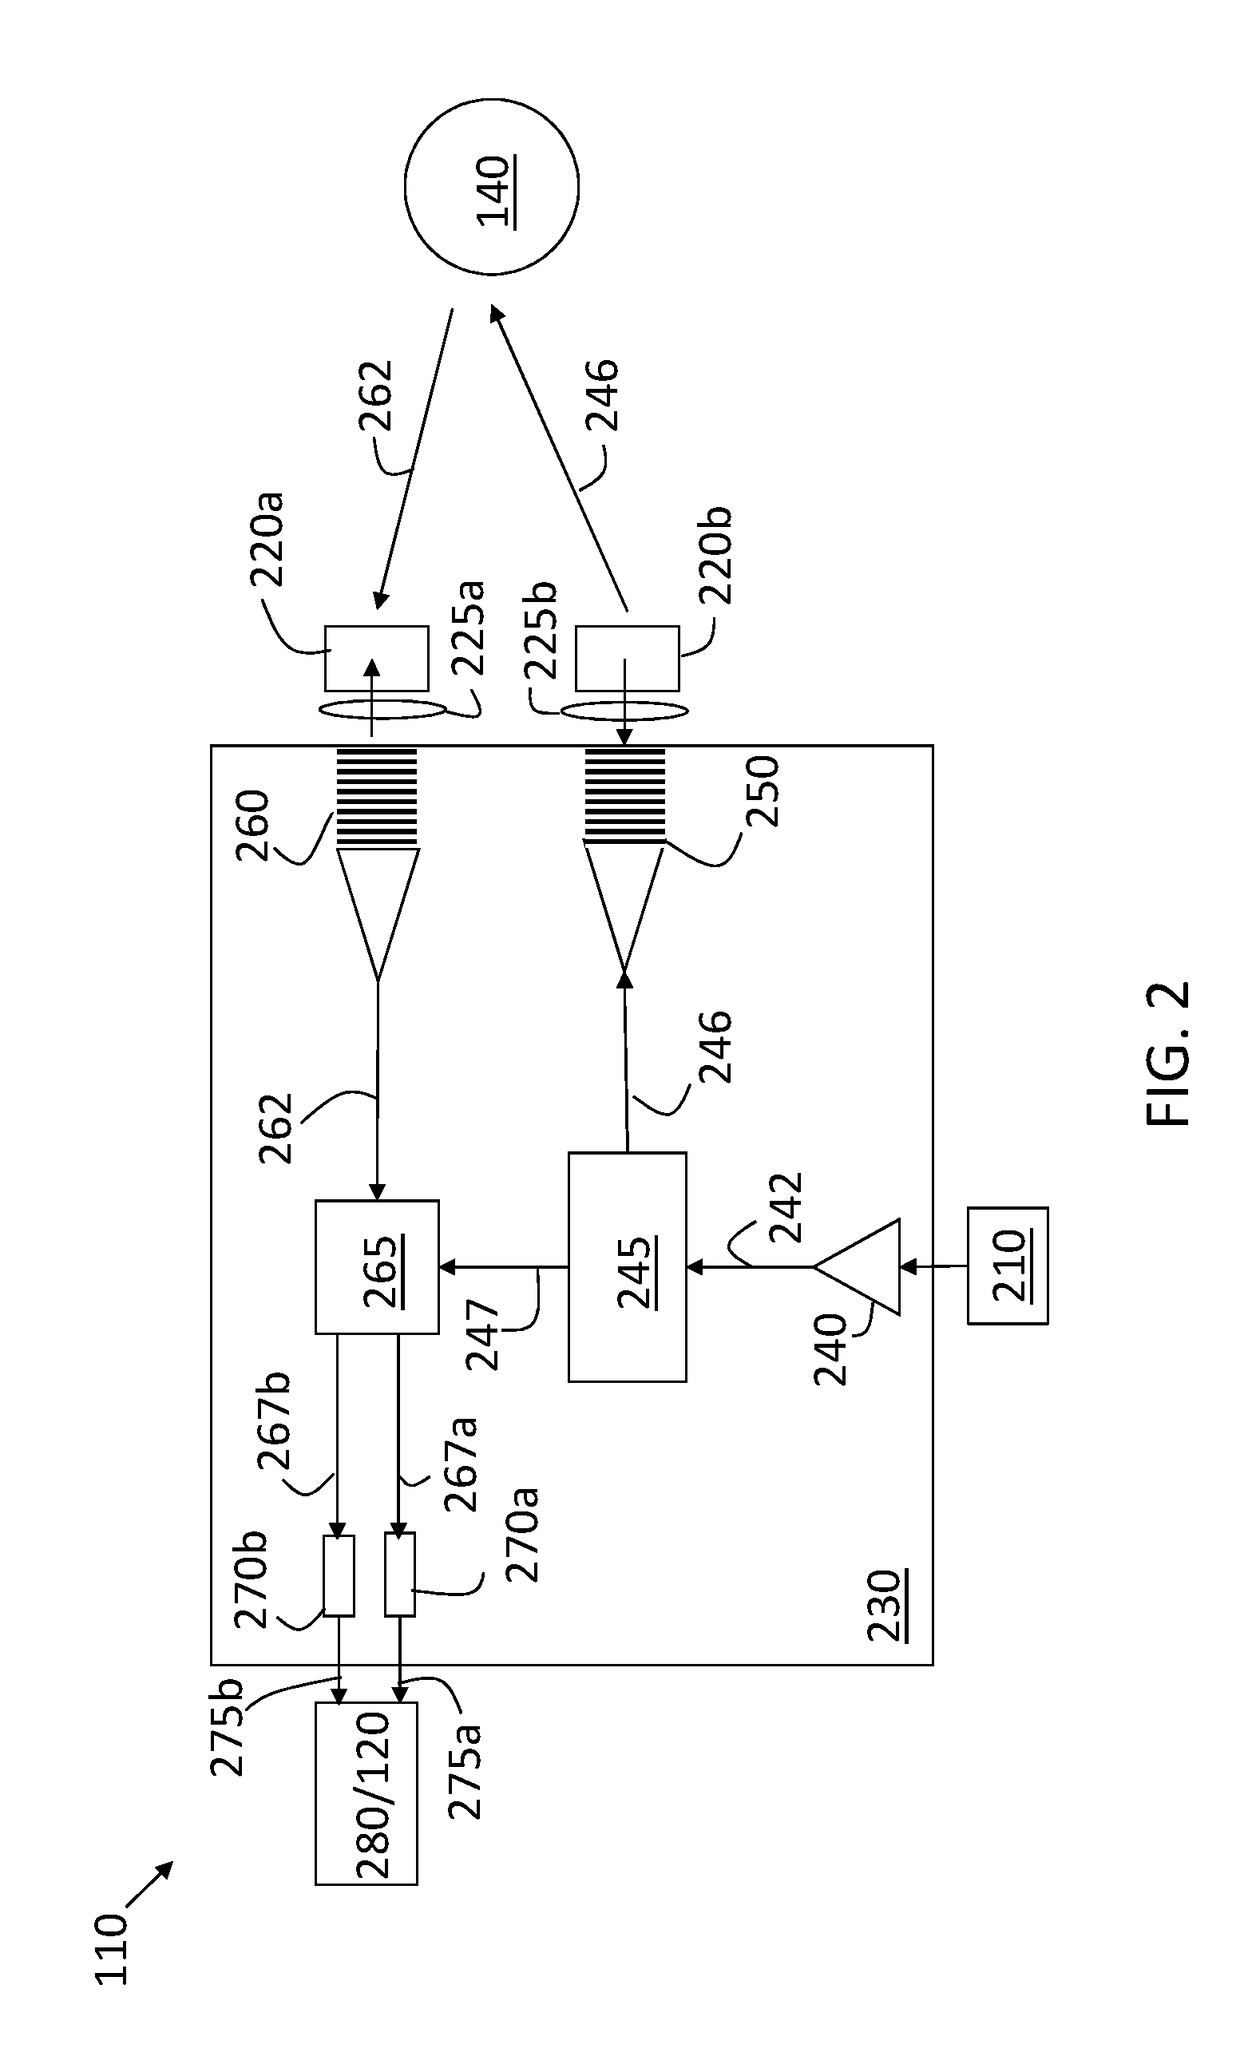 Laser diode optical frequency modulation linearization algorithm